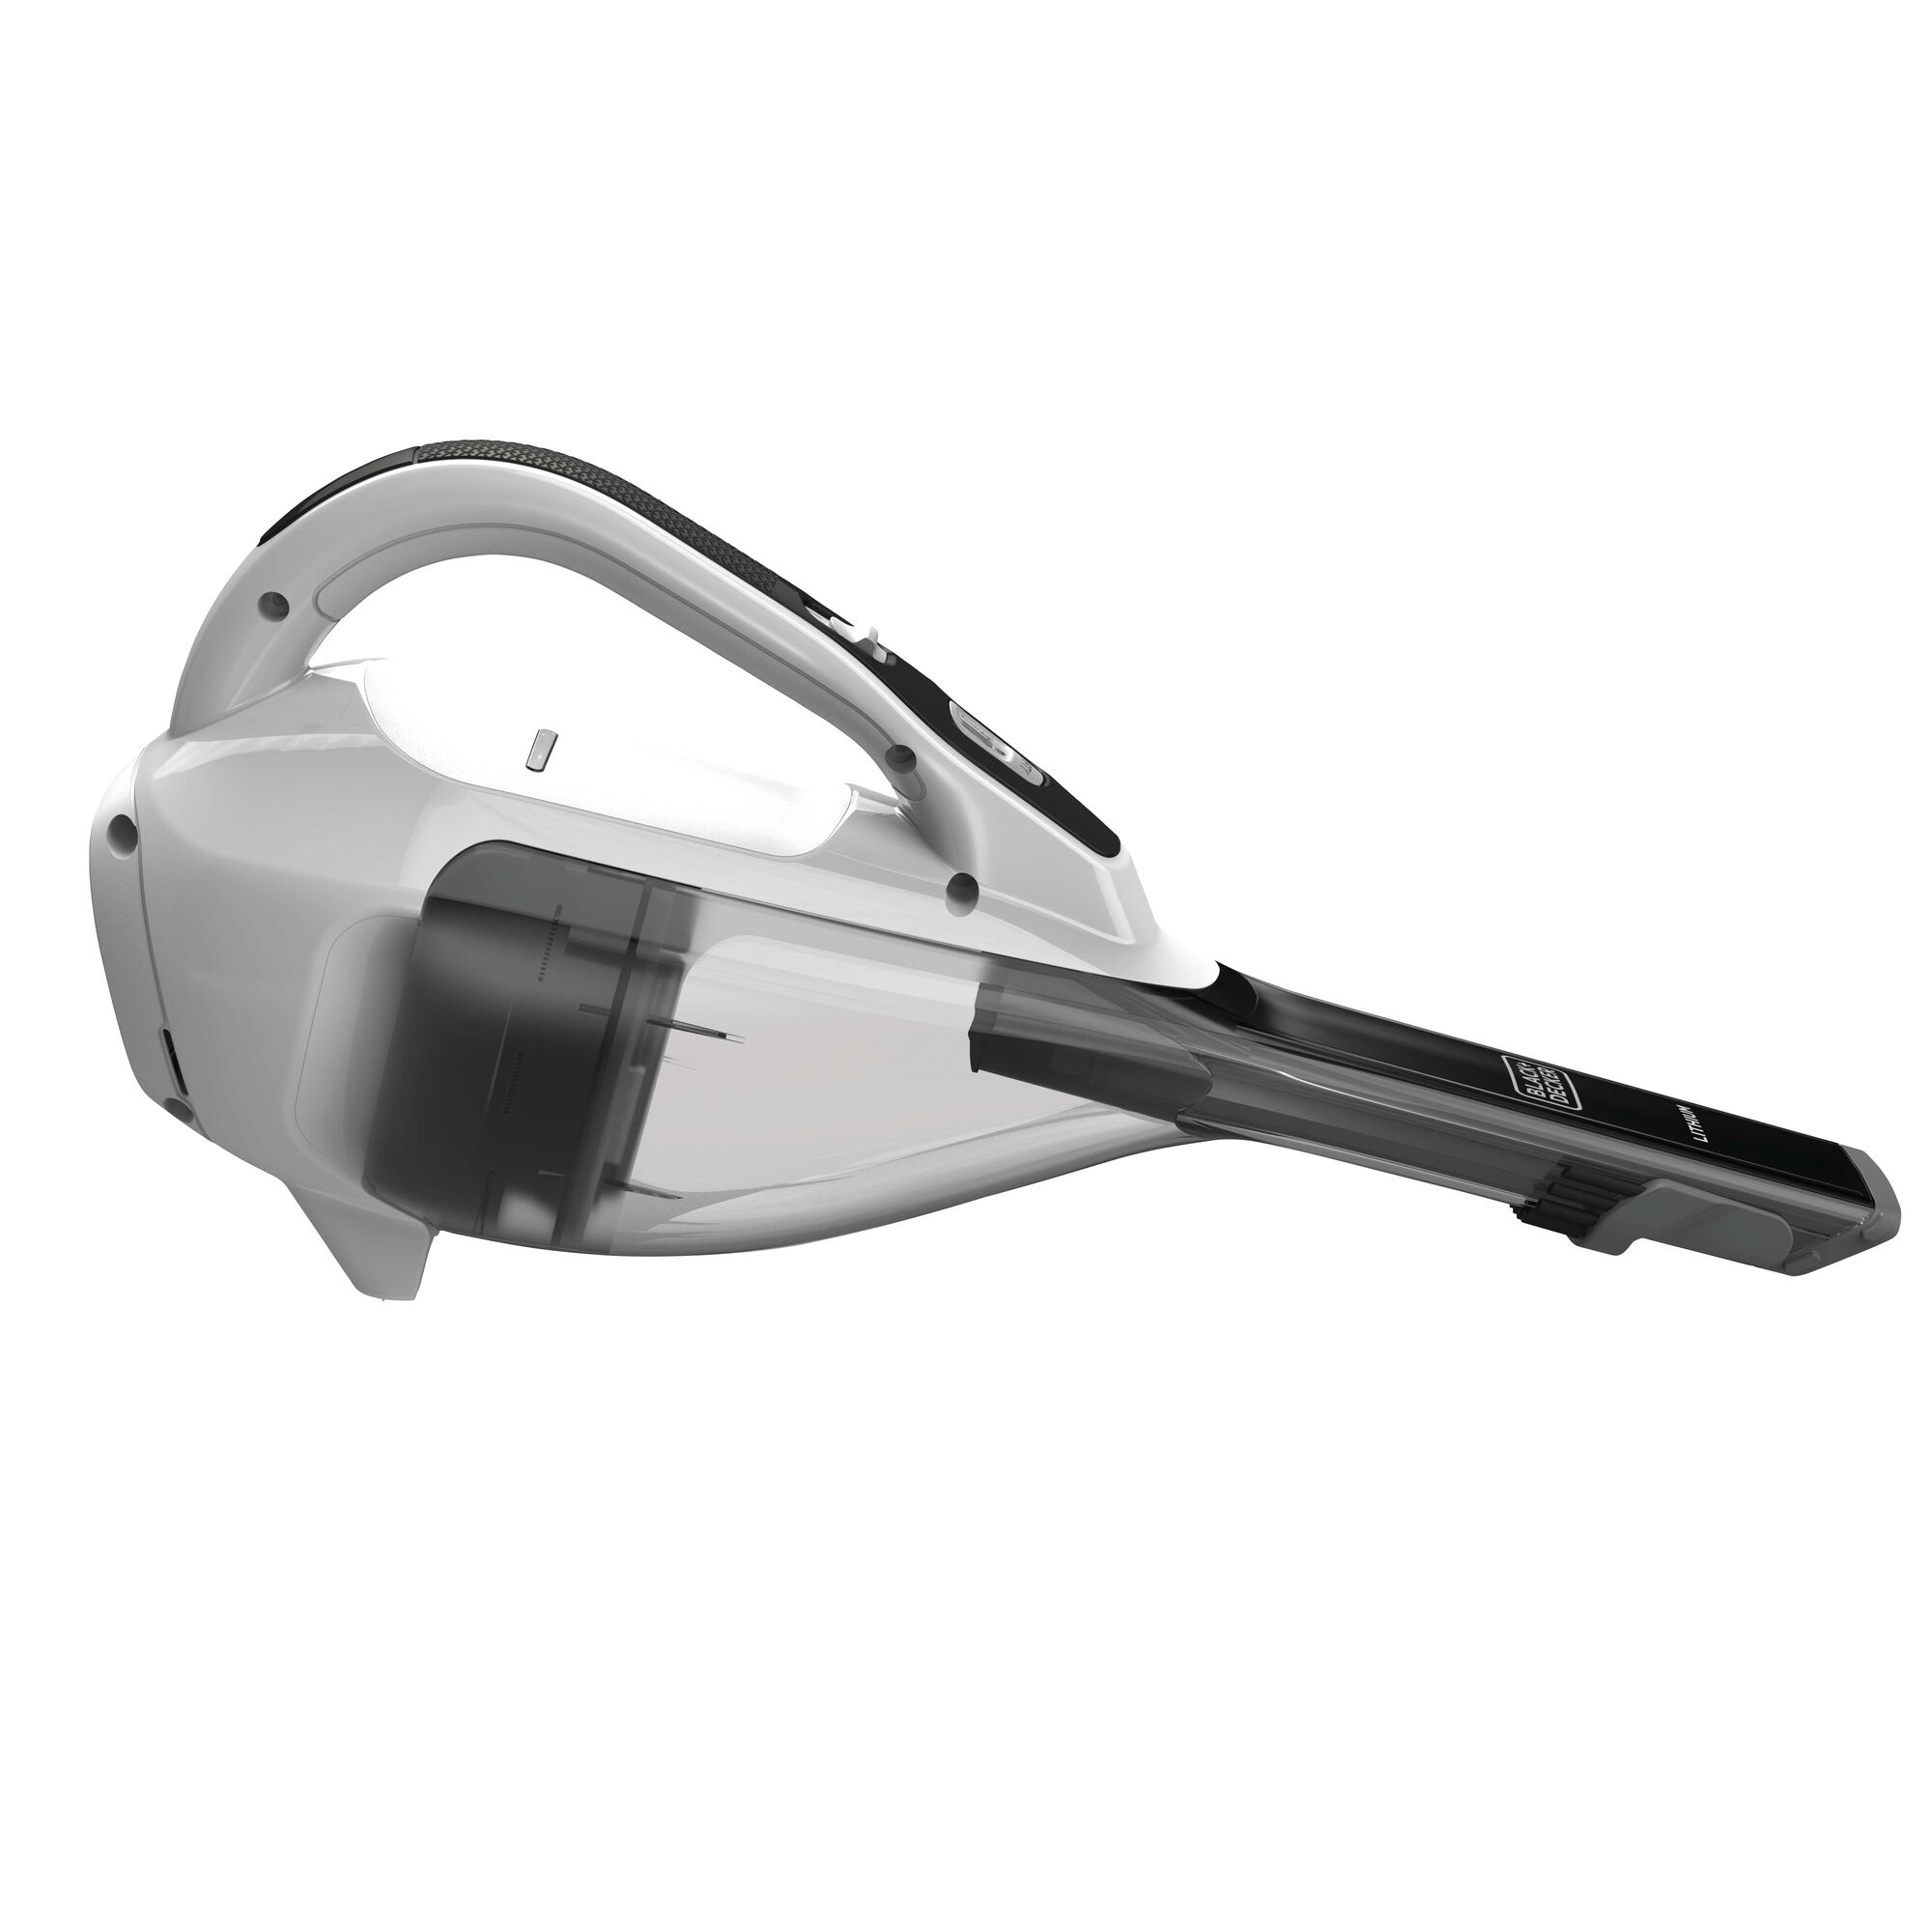 dustbuster Advanced Clean Cordless Hand Vacuum with Scented Filter.